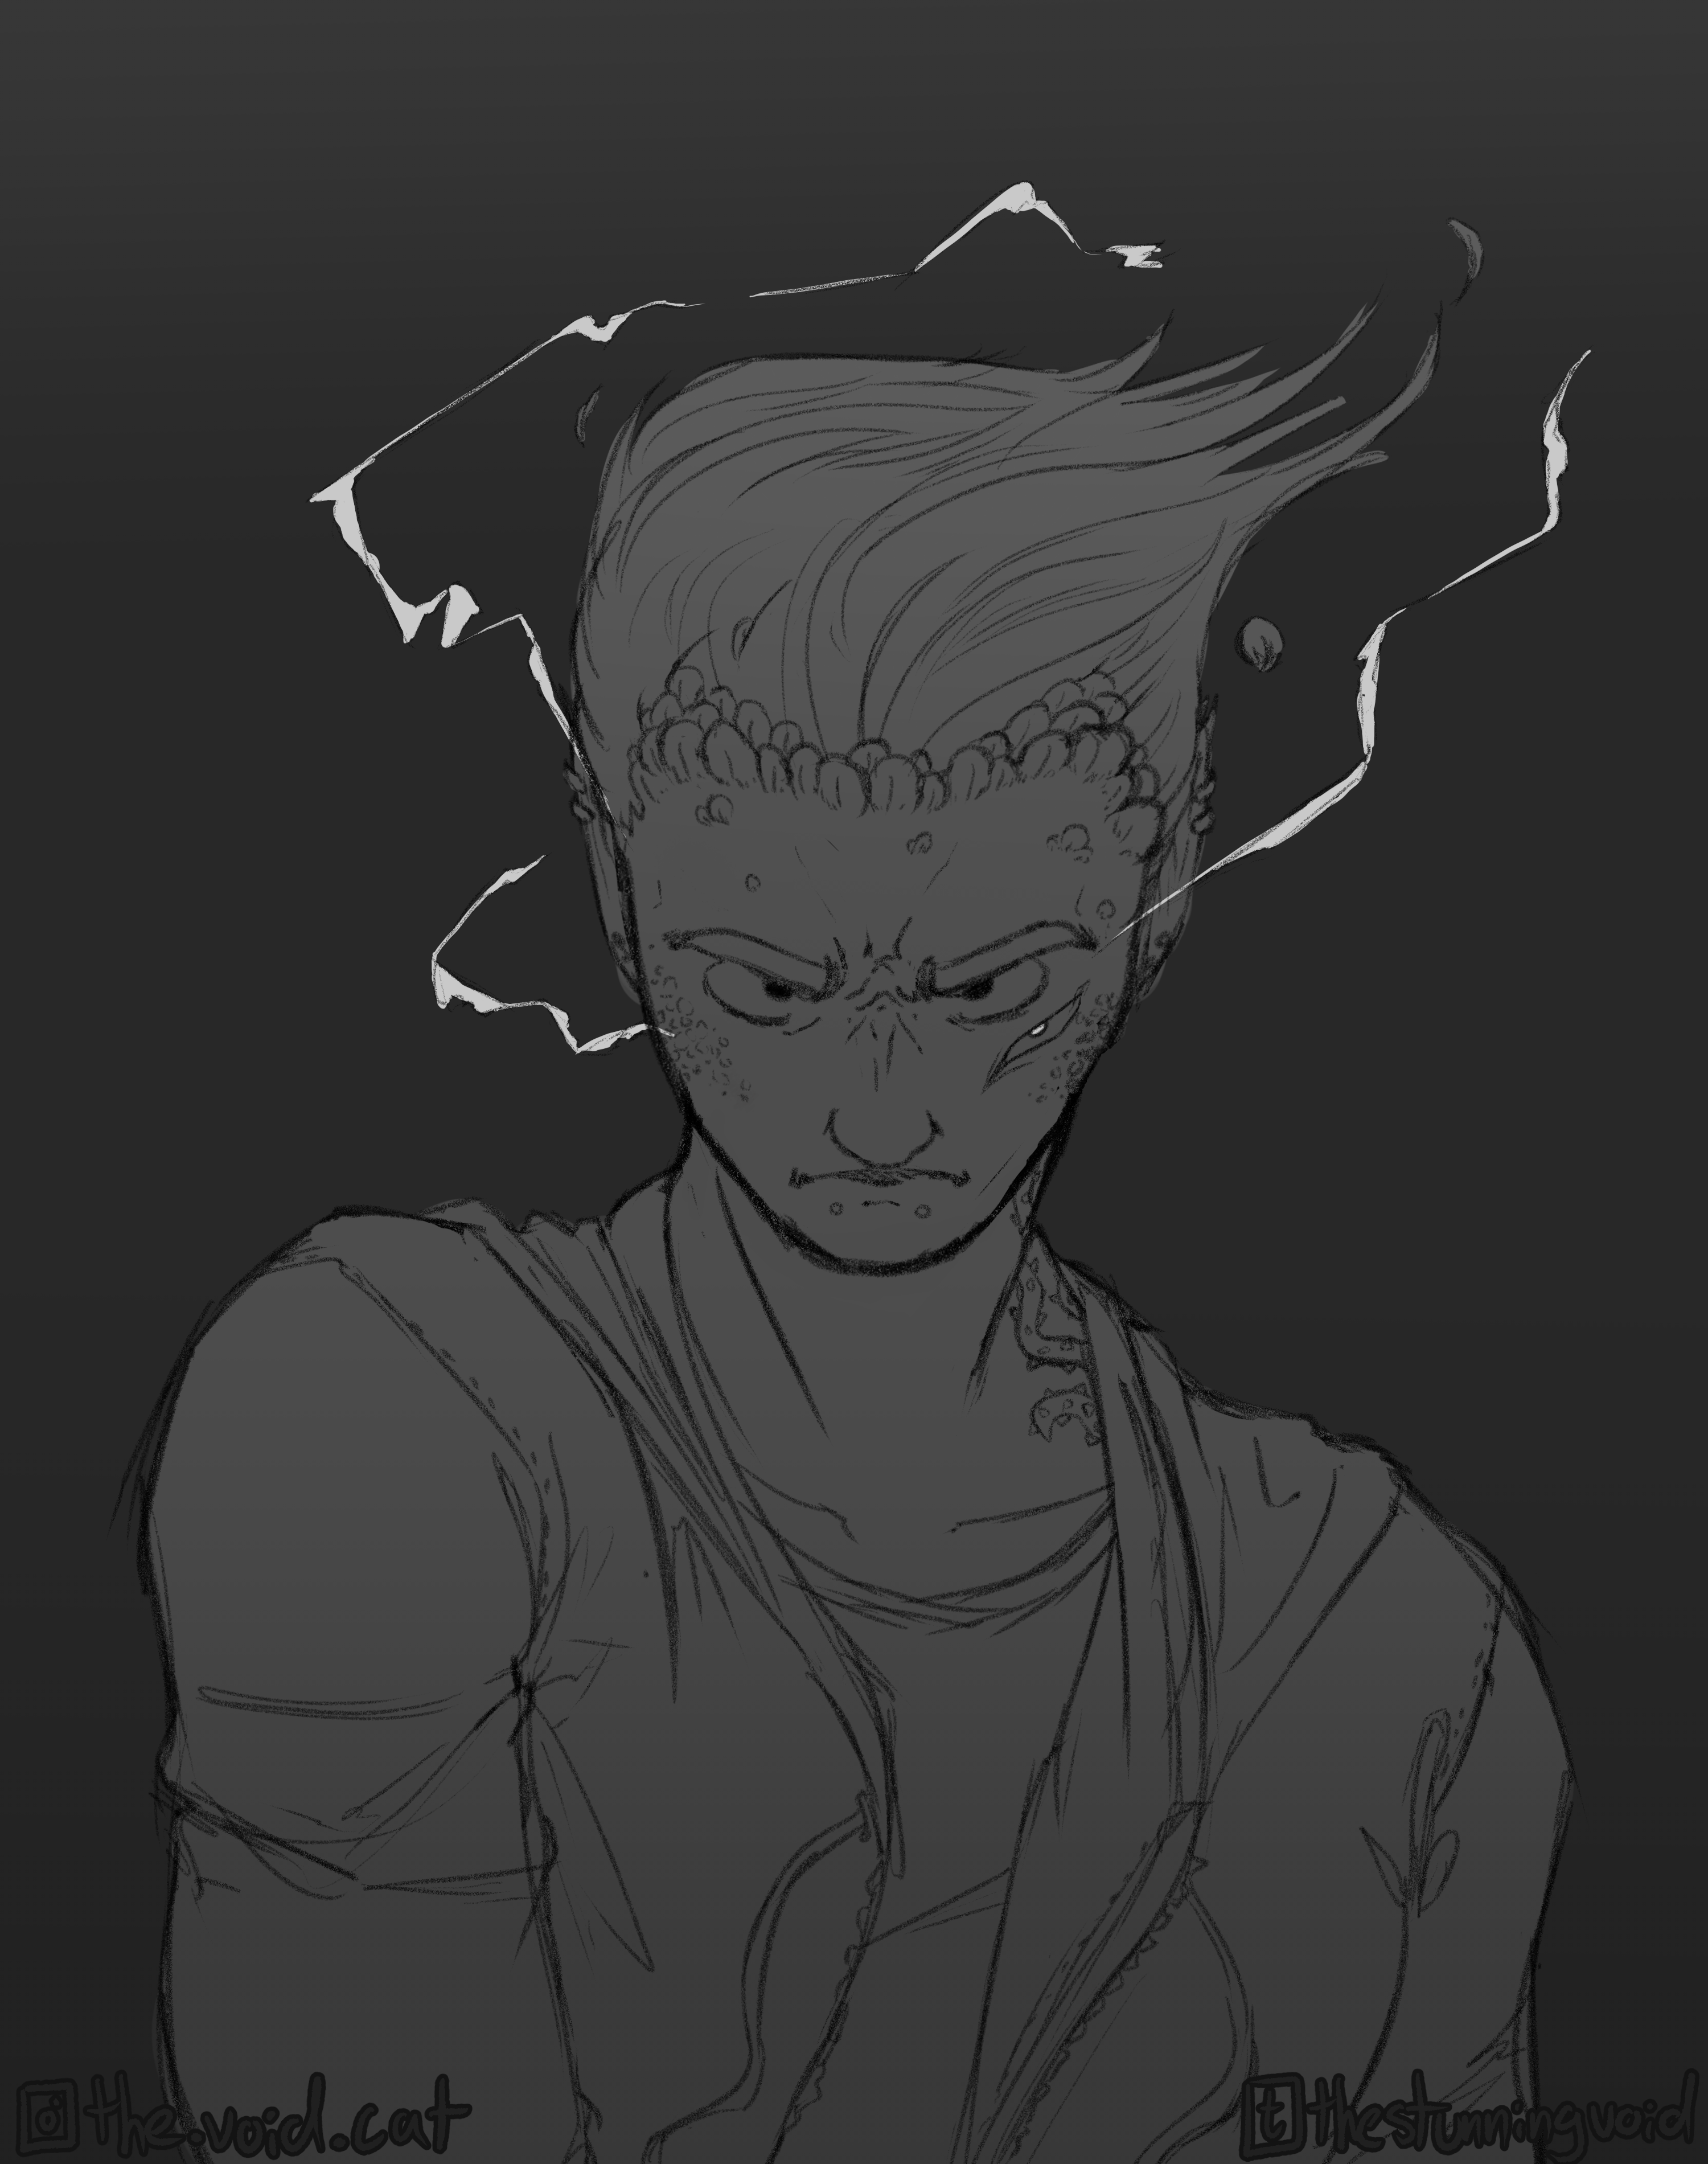 A monochrome sketch of Abraxus, partially transformed into a demon, from the shoulders up. He's wearing a simple t-shirt and hoodie. A tattoo of thorny vines is visible on the left side of his neck. His hair is blowing in the wind and his face is angled downward with a determined expression. He has studded snake-bite piercings beneath his lower lip and there is an extra, third eye beneath his left eye. Small, rounded feathers are growing from his hairline, and energy crackles around him.